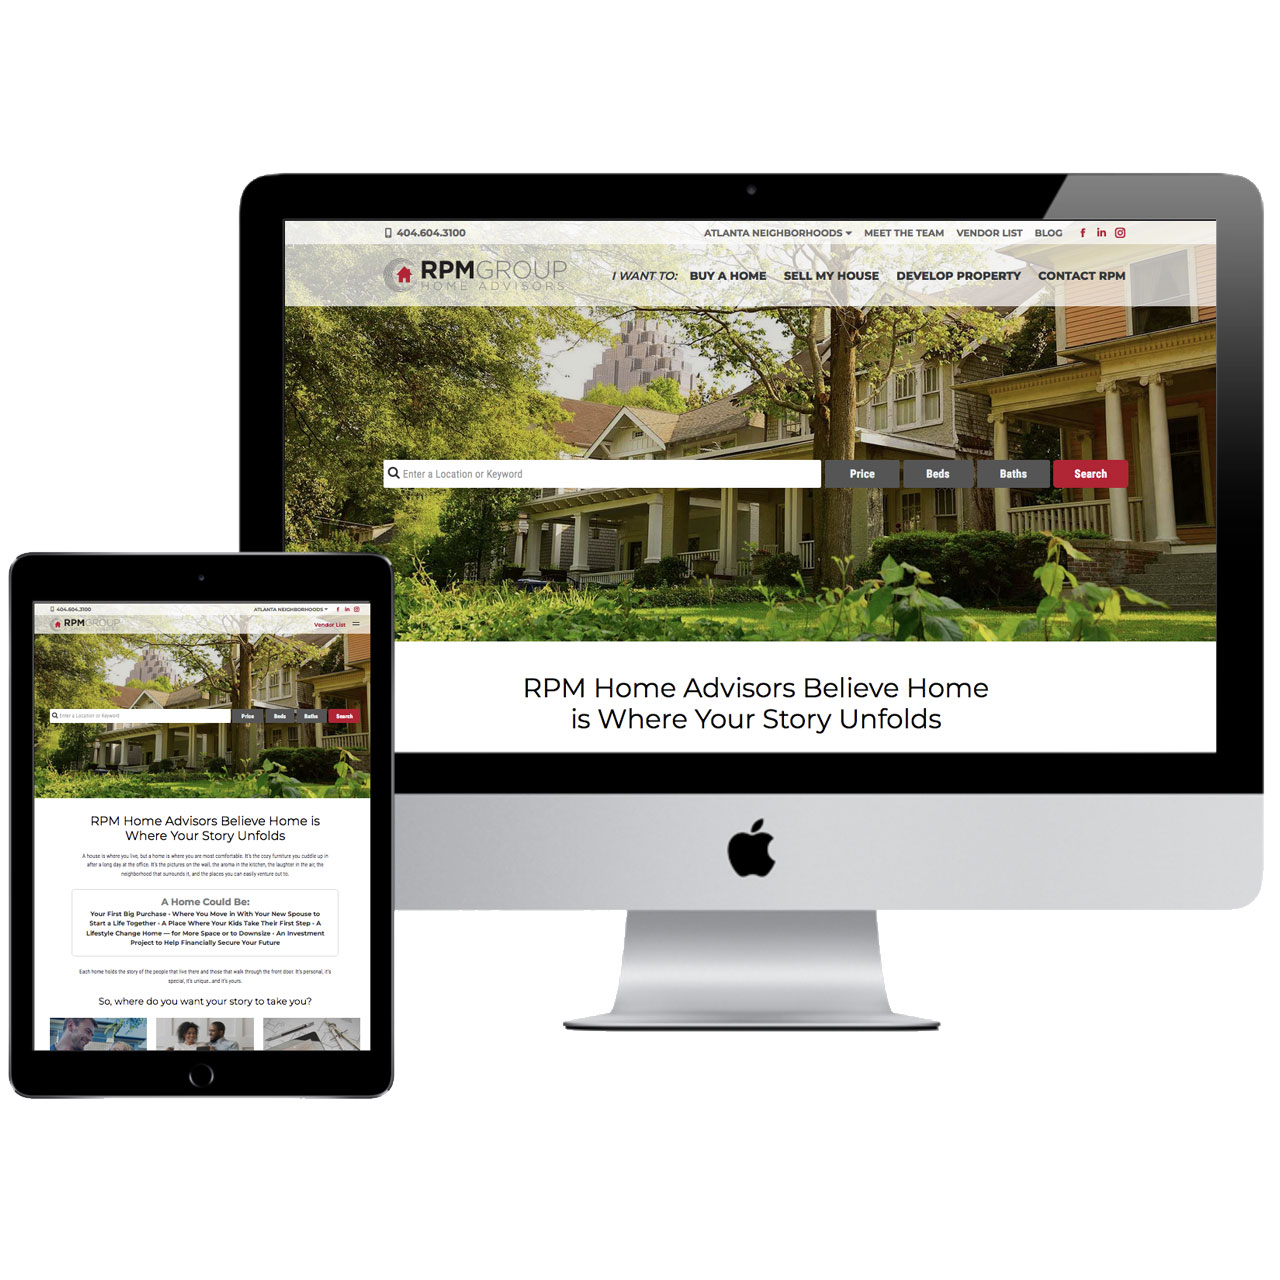 RPM Home Advisors website shown on iMac and tablet device